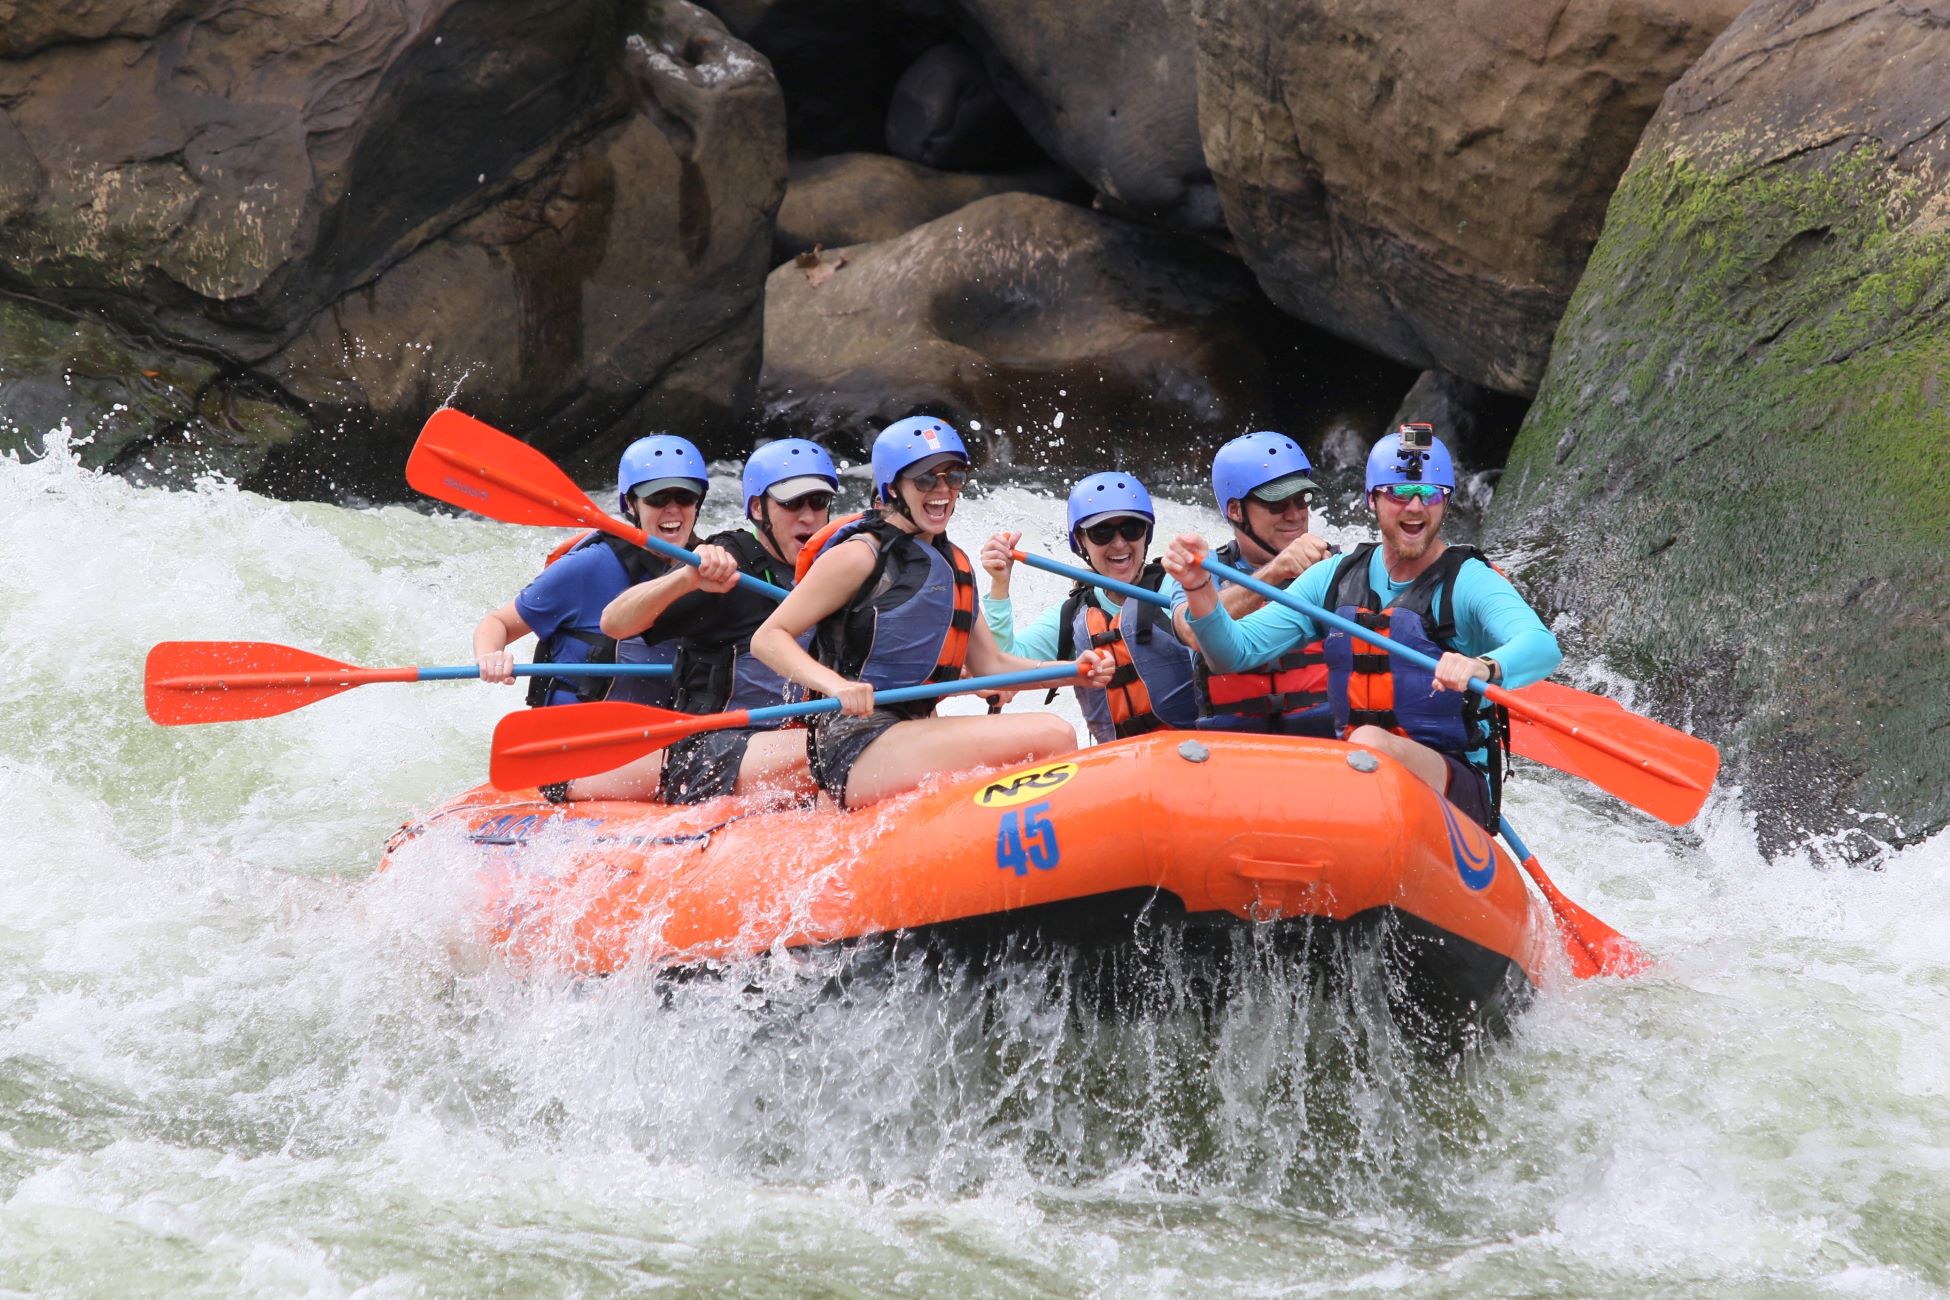 An image of people white water rafting.
